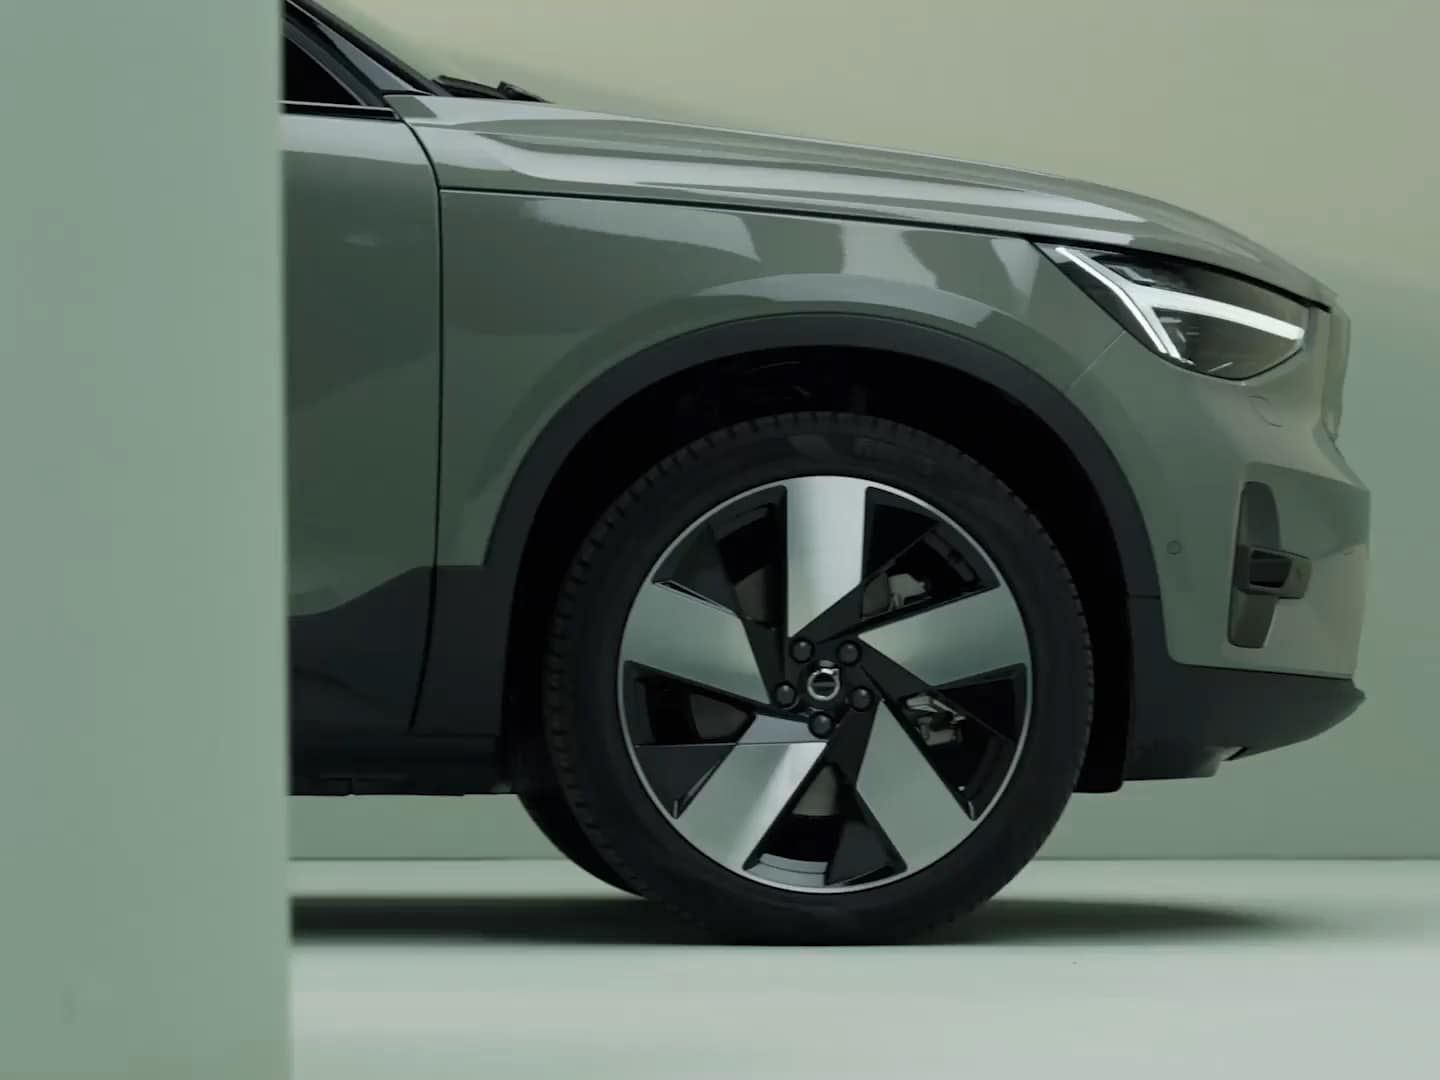 Hubcap and wheel design of the Volvo XC40 Recharge pure electric.